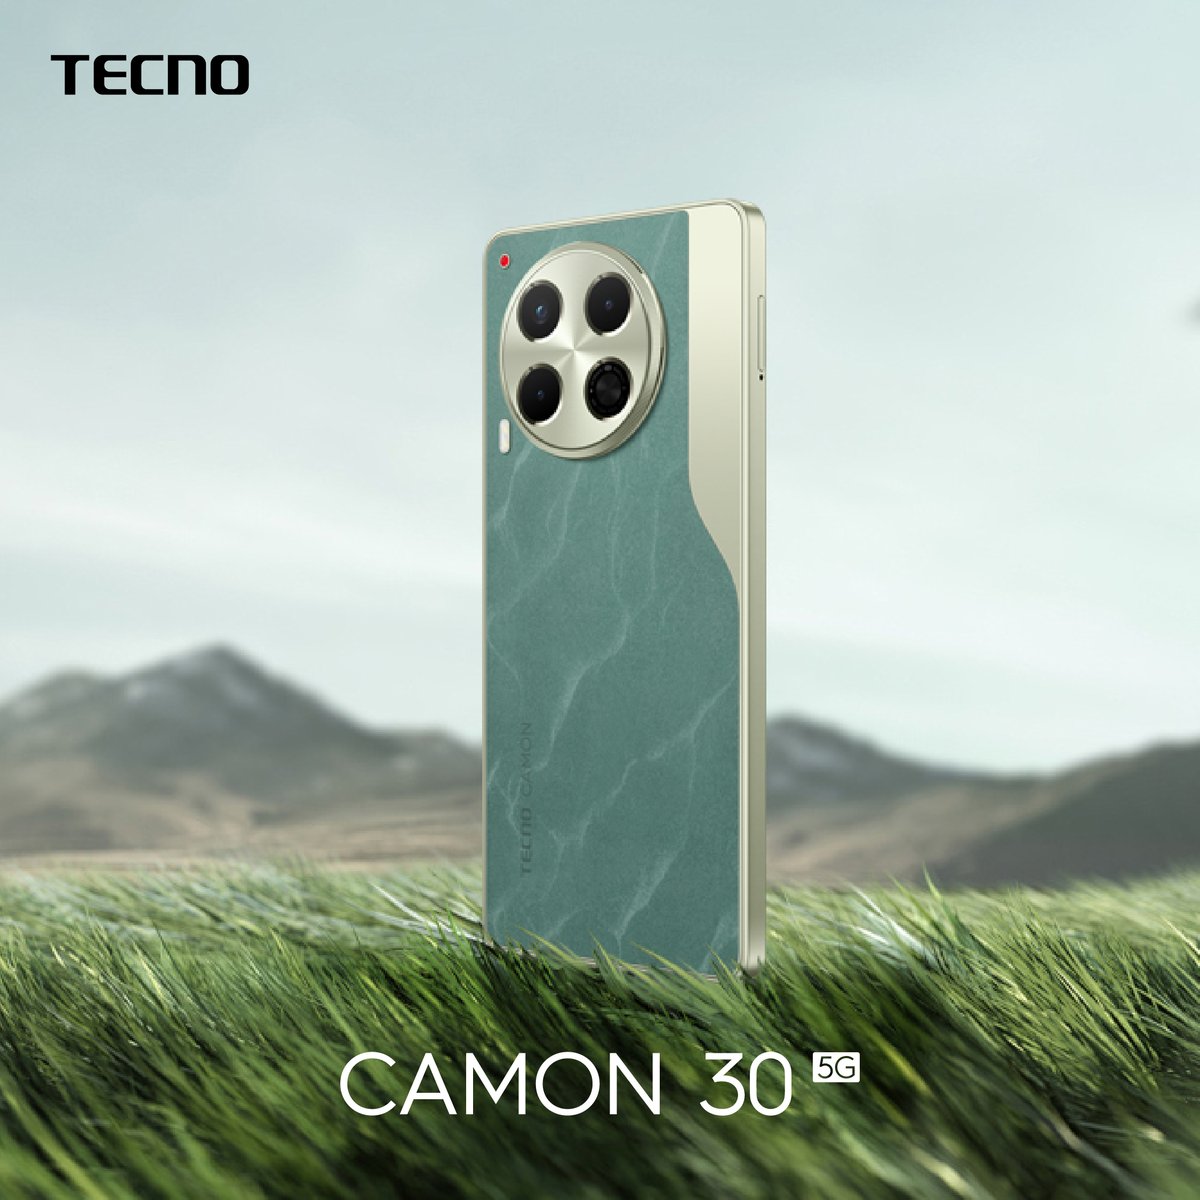 Meet the #Camon305G – a powerhouse of elegance that deserves a spot in your hands! Its perfect tech-art leather texture is just the beginning. Experience outstanding performance and style in one device. Get yours now! #Camon30Series #PortraitMaster